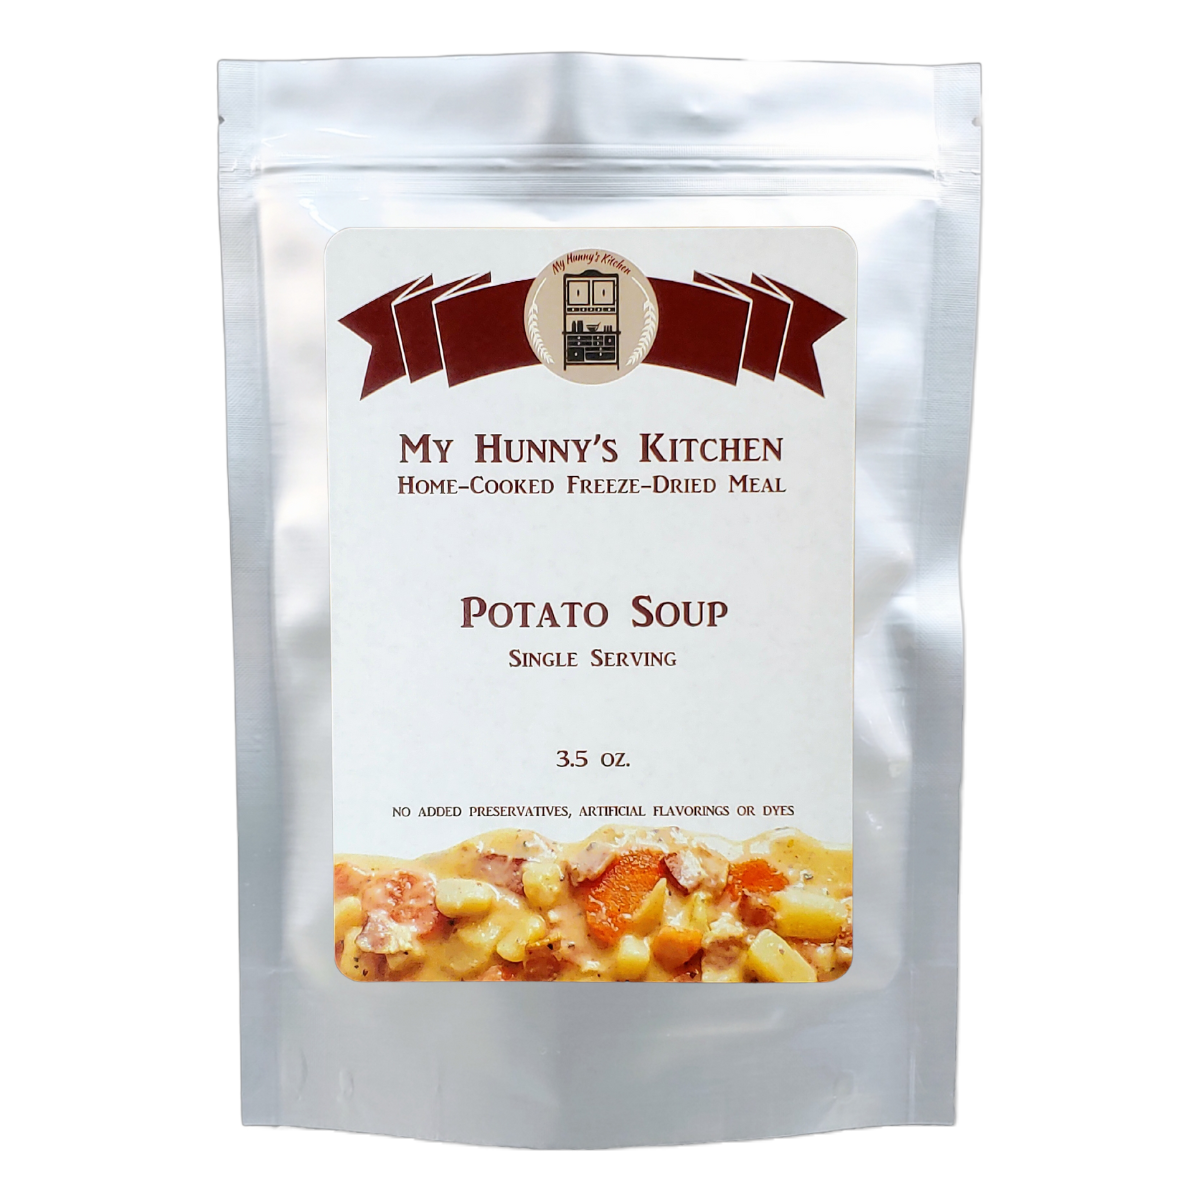 Potato Soup Freeze Dried Meal packaging front view